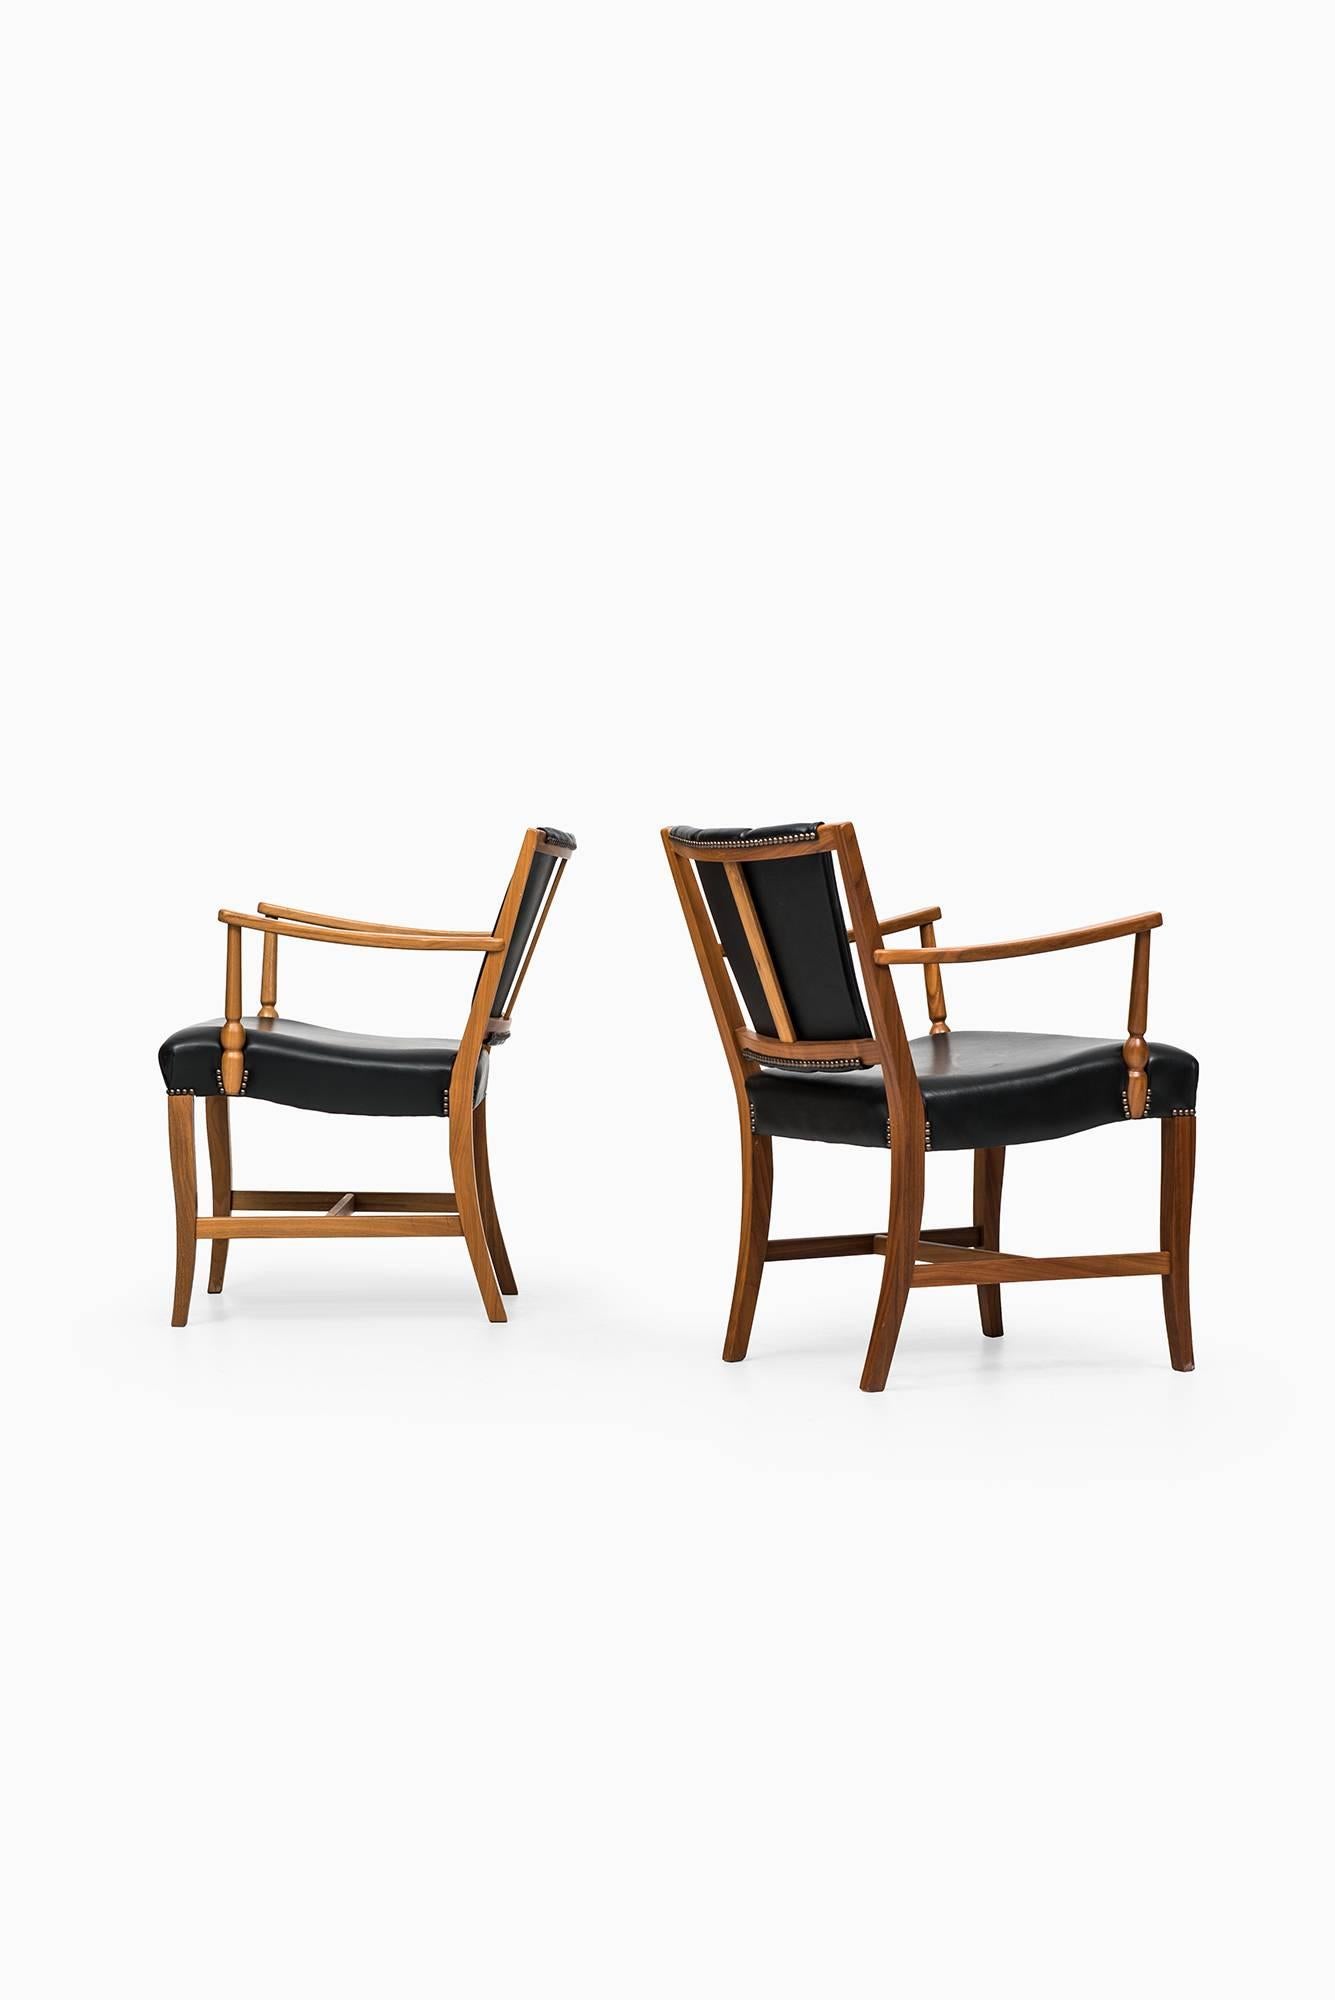 Scandinavian Modern Pair of Easy Chairs / Armchairs Designed by Josef Frank Produced by Svenskt Tenn